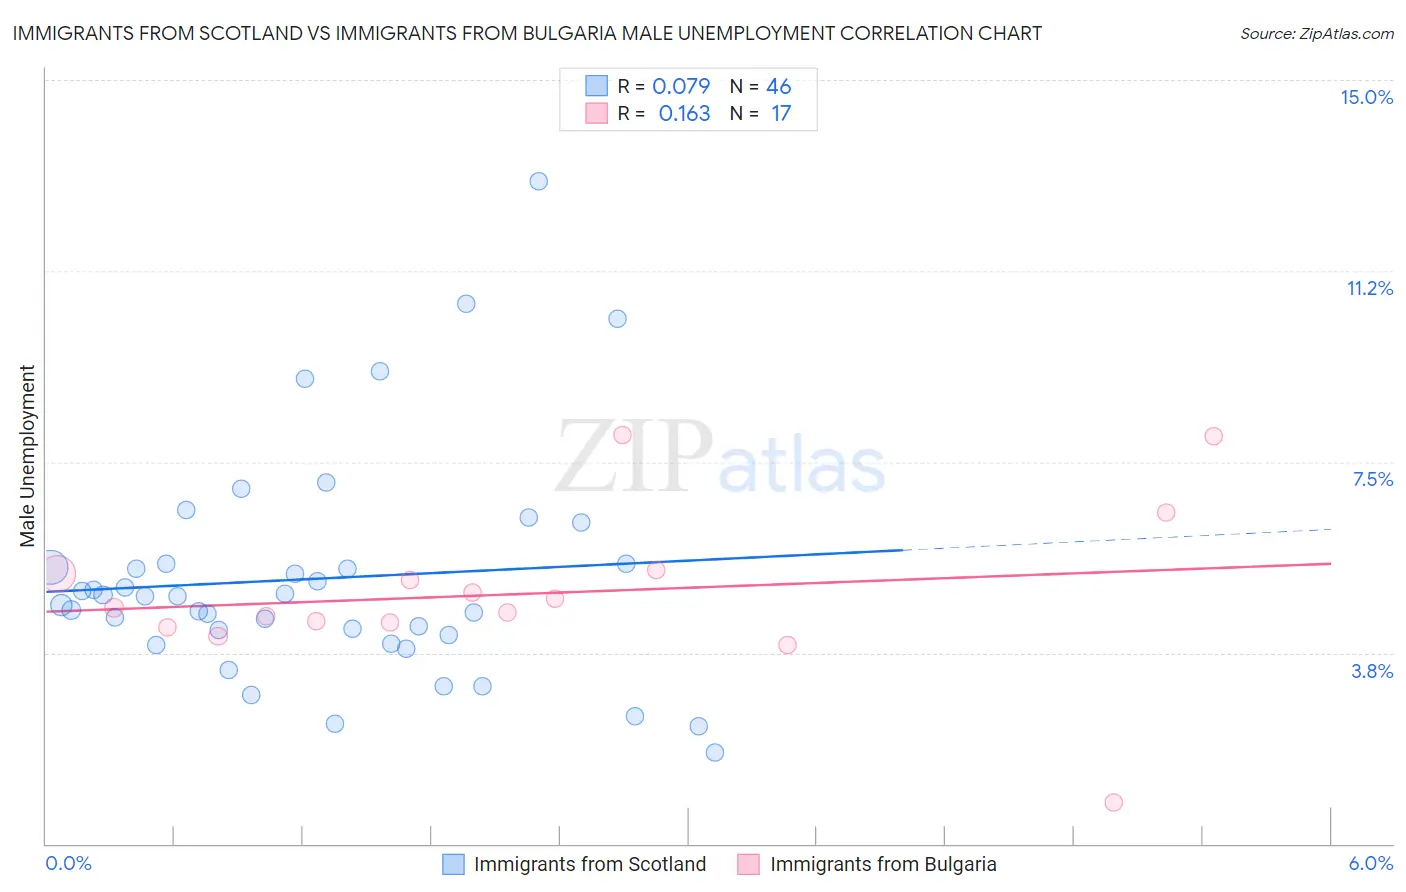 Immigrants from Scotland vs Immigrants from Bulgaria Male Unemployment